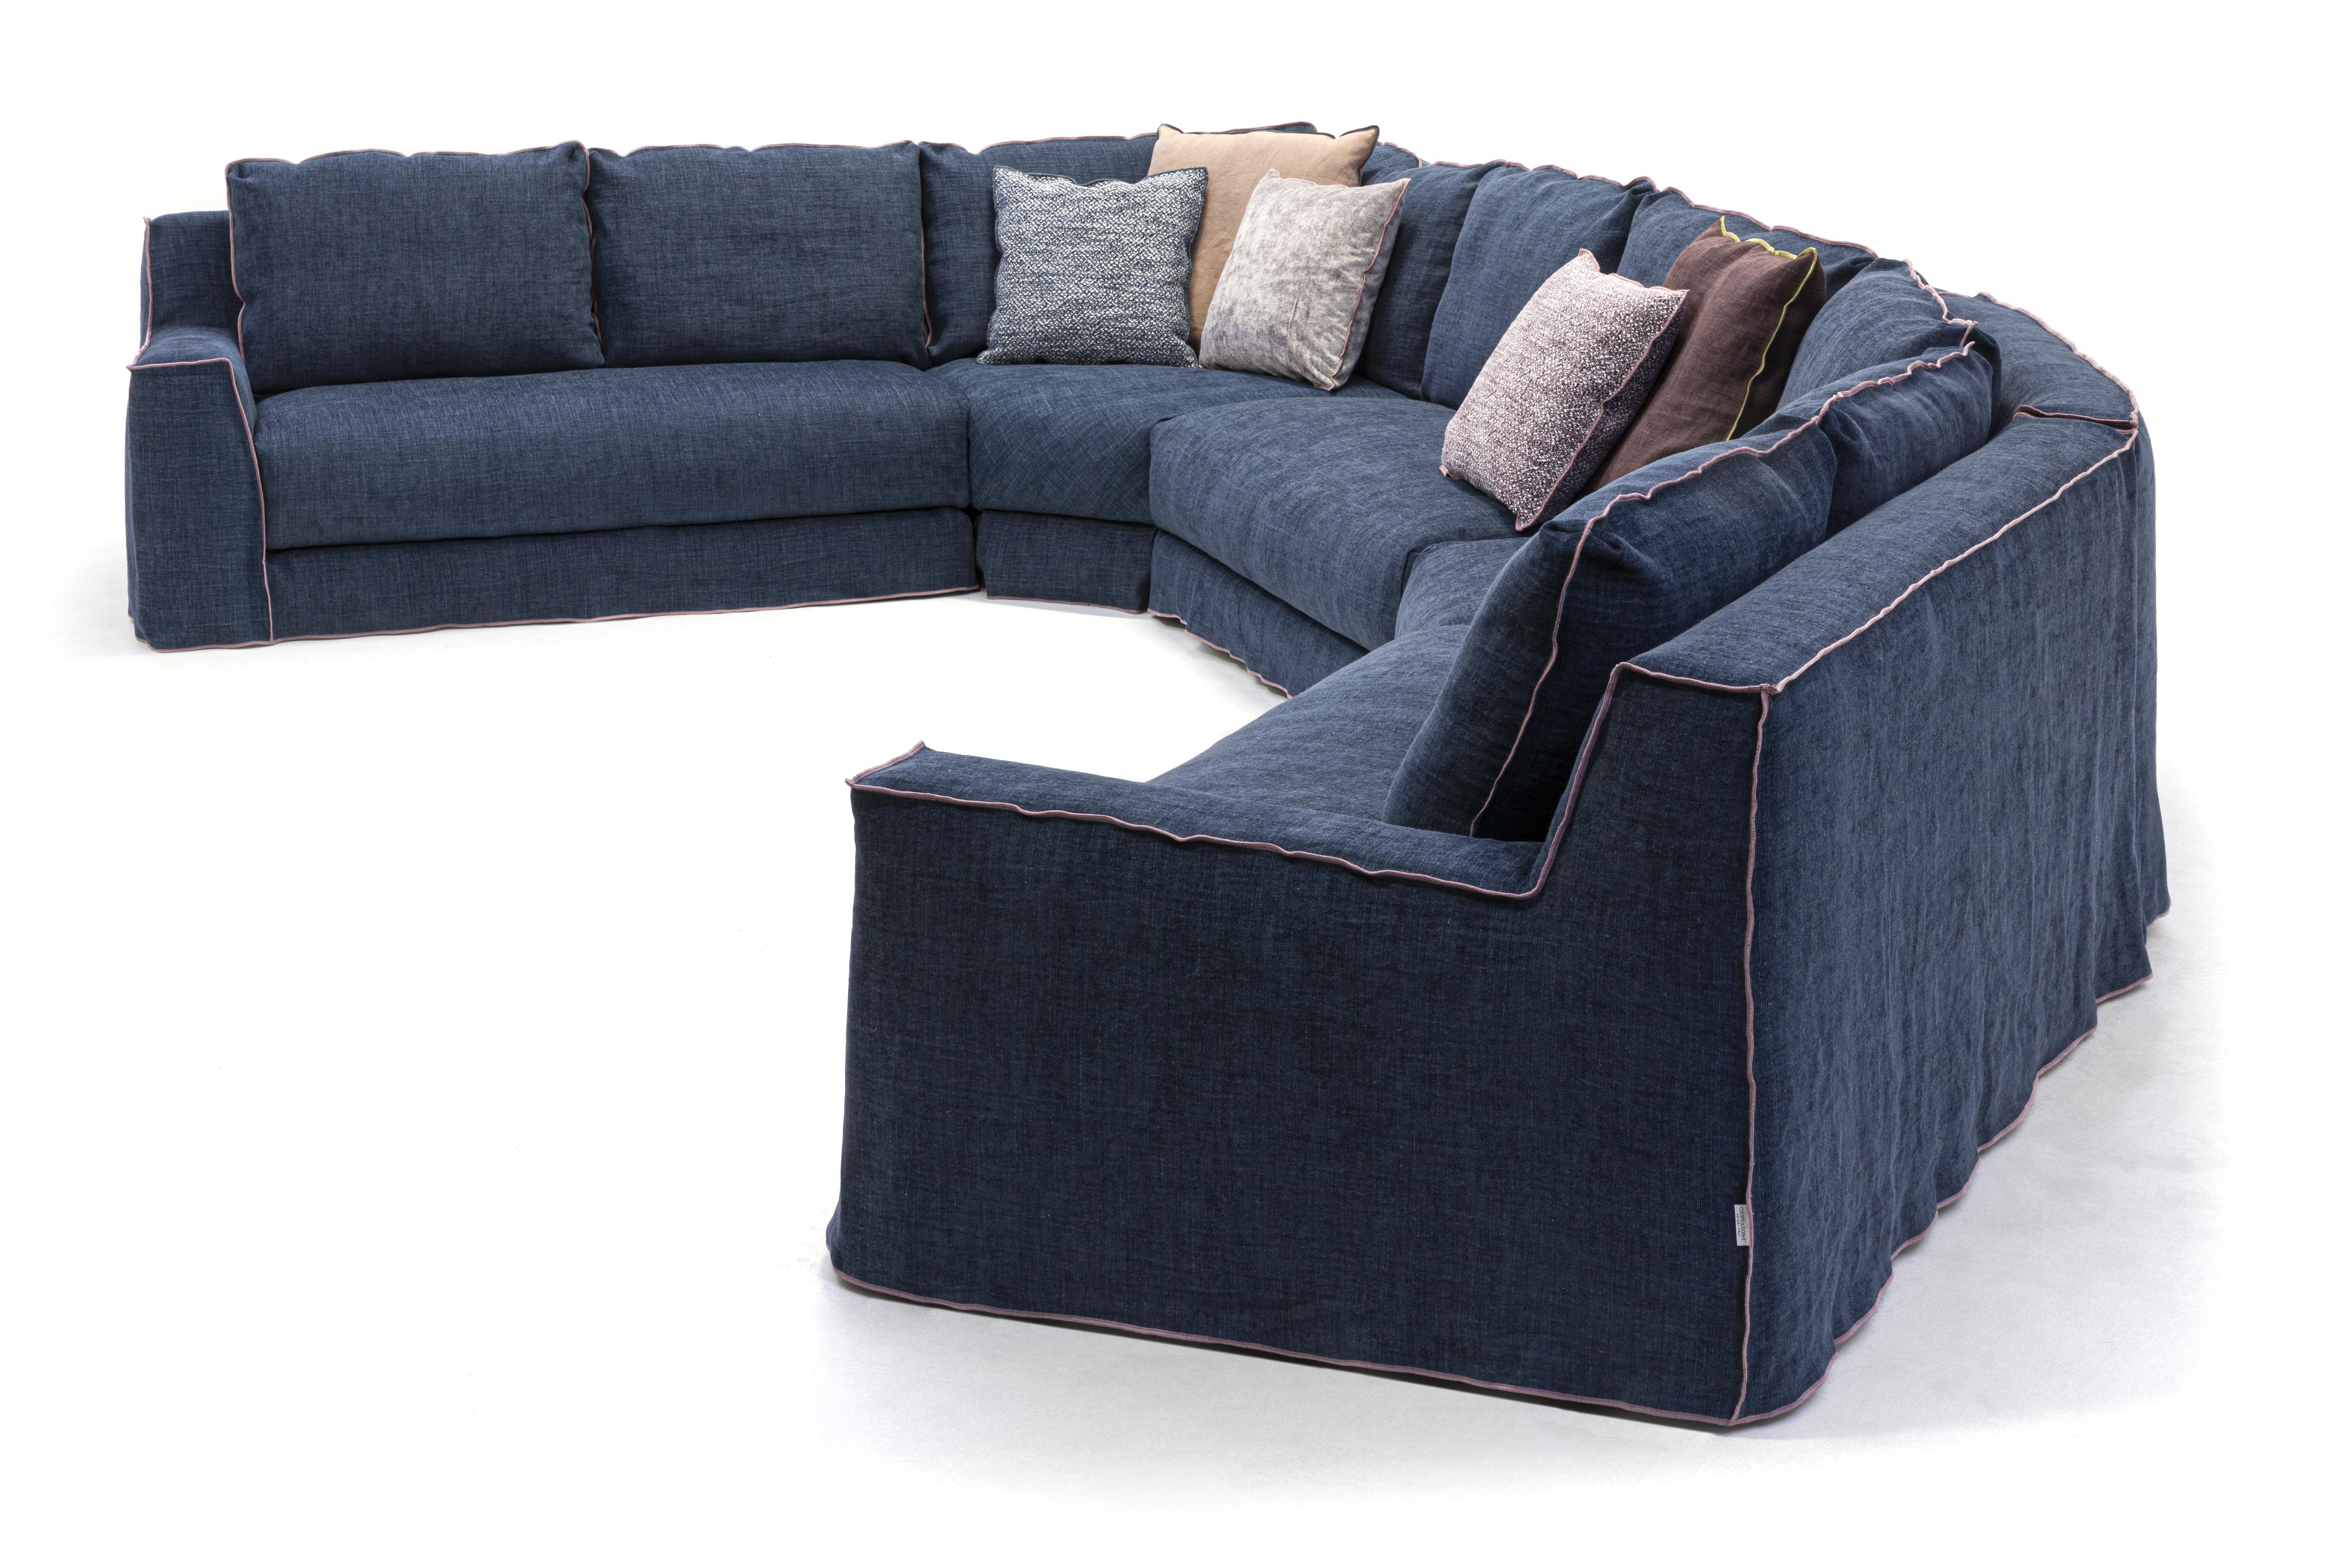 Gervasoni Loll 11 Modular Sofa in Munch Upholstery by Paola Navone In New Condition For Sale In Brooklyn, NY